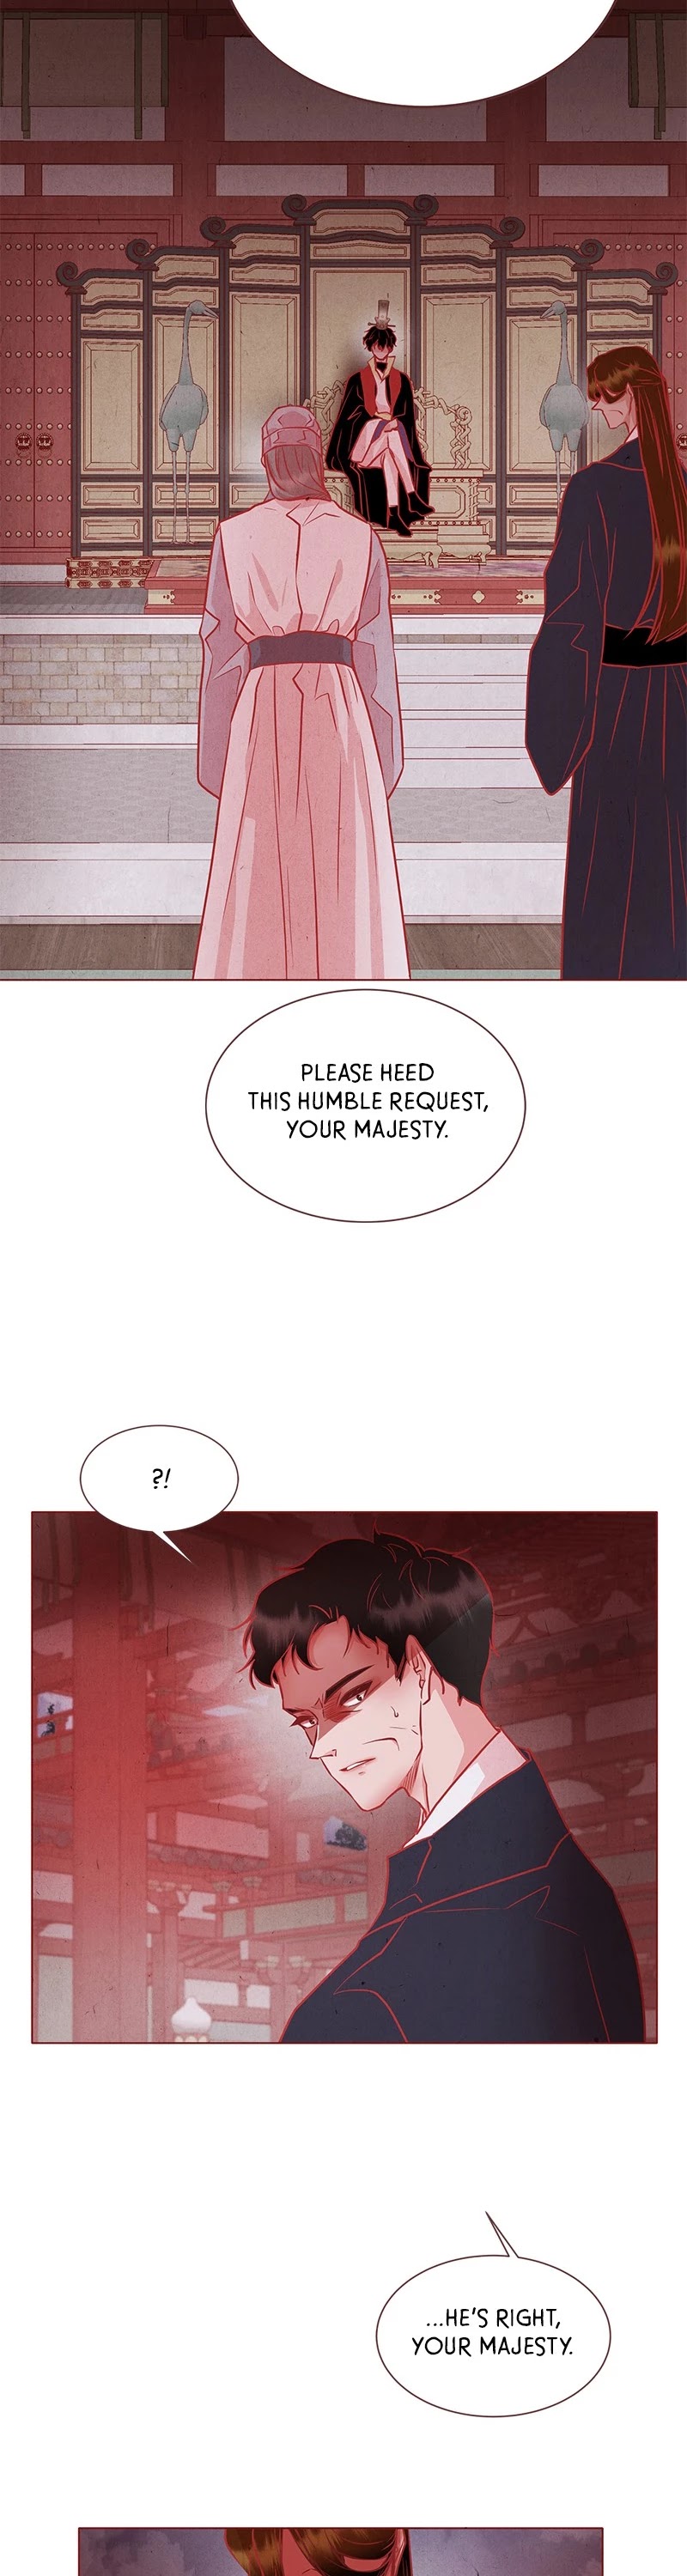 The Snake And The Flower - Page 2